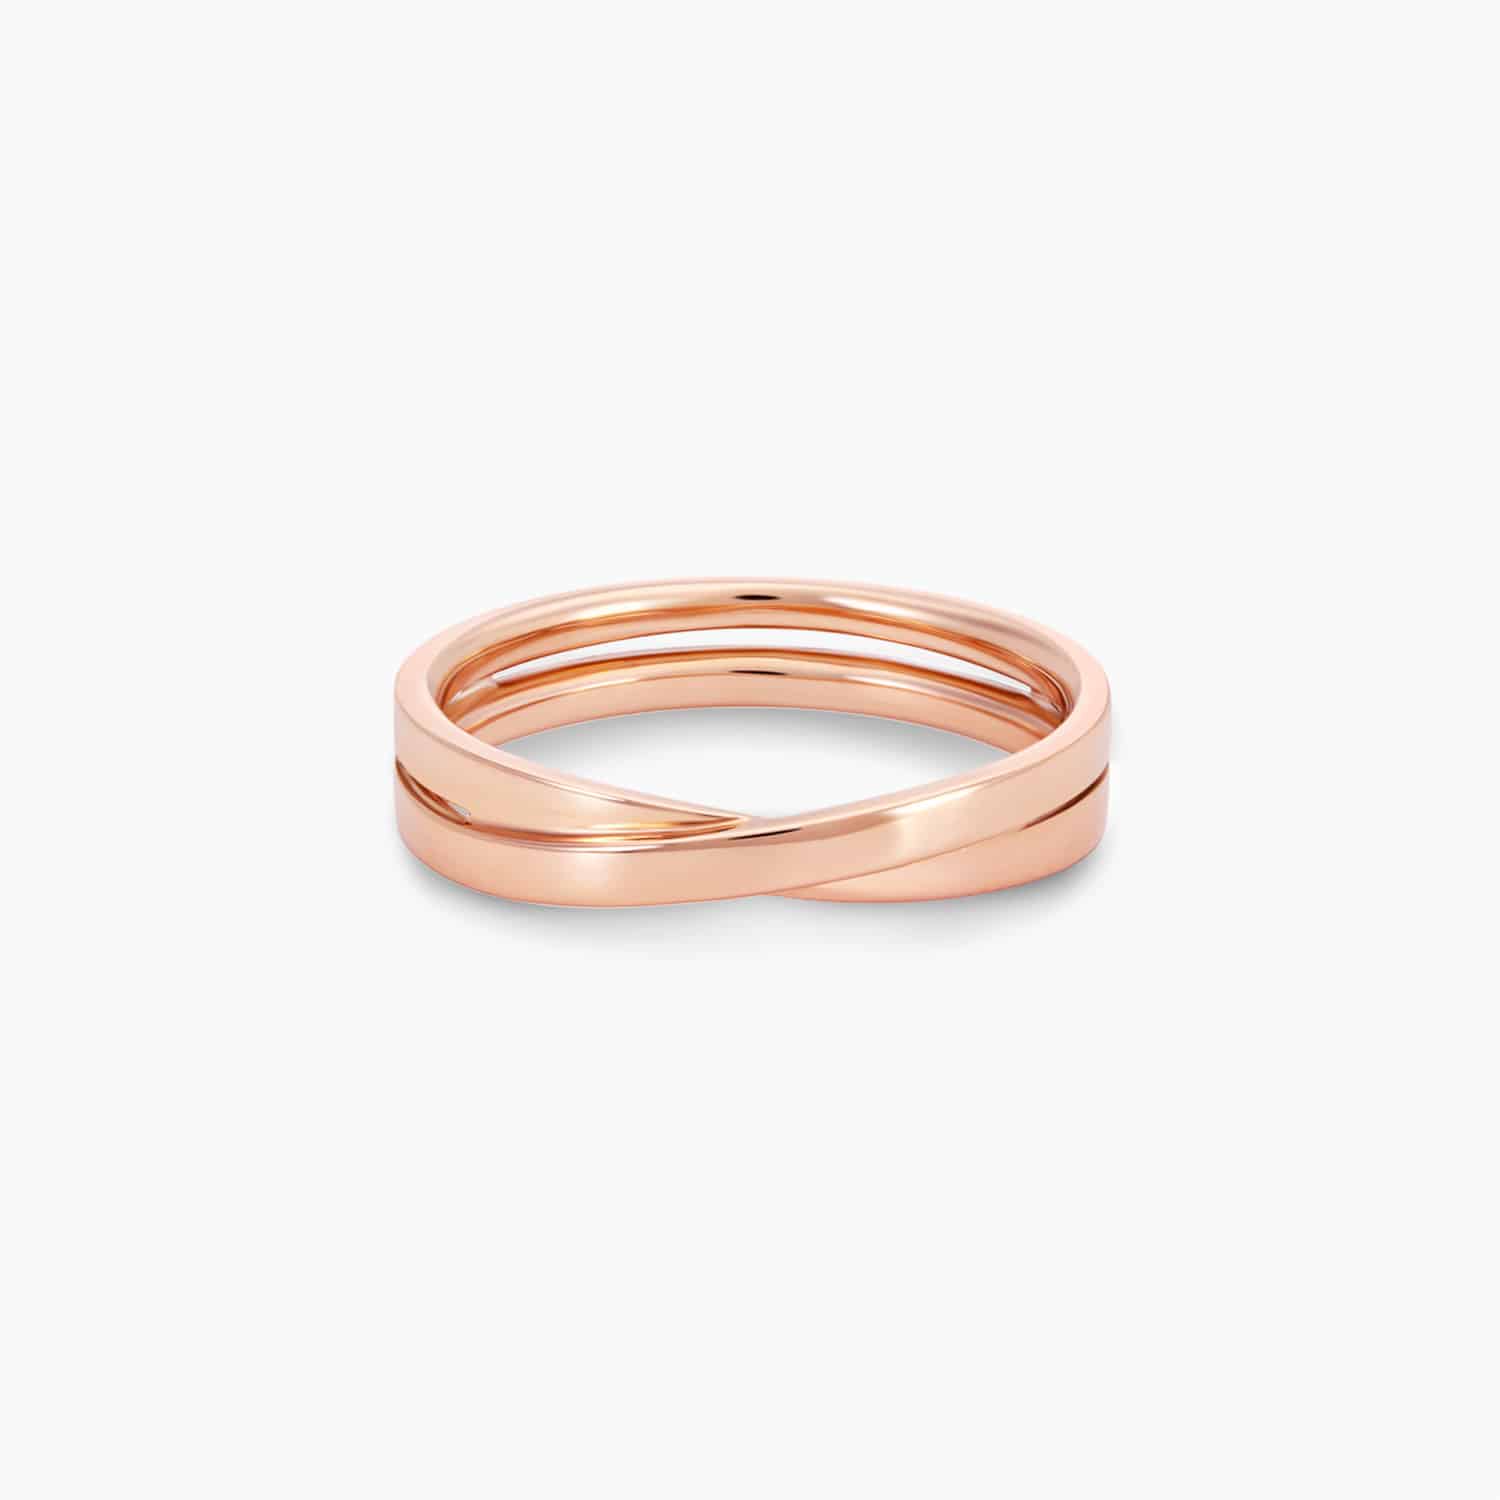 LVC DESIRIO CROSS WEDDING BAND IN ROSE GOLD WITH GLOSSY FINISH a wedding band for men in 18k rose gold with 1 diamond of 0.01 carat weight 钻石 戒指 cincin diamond